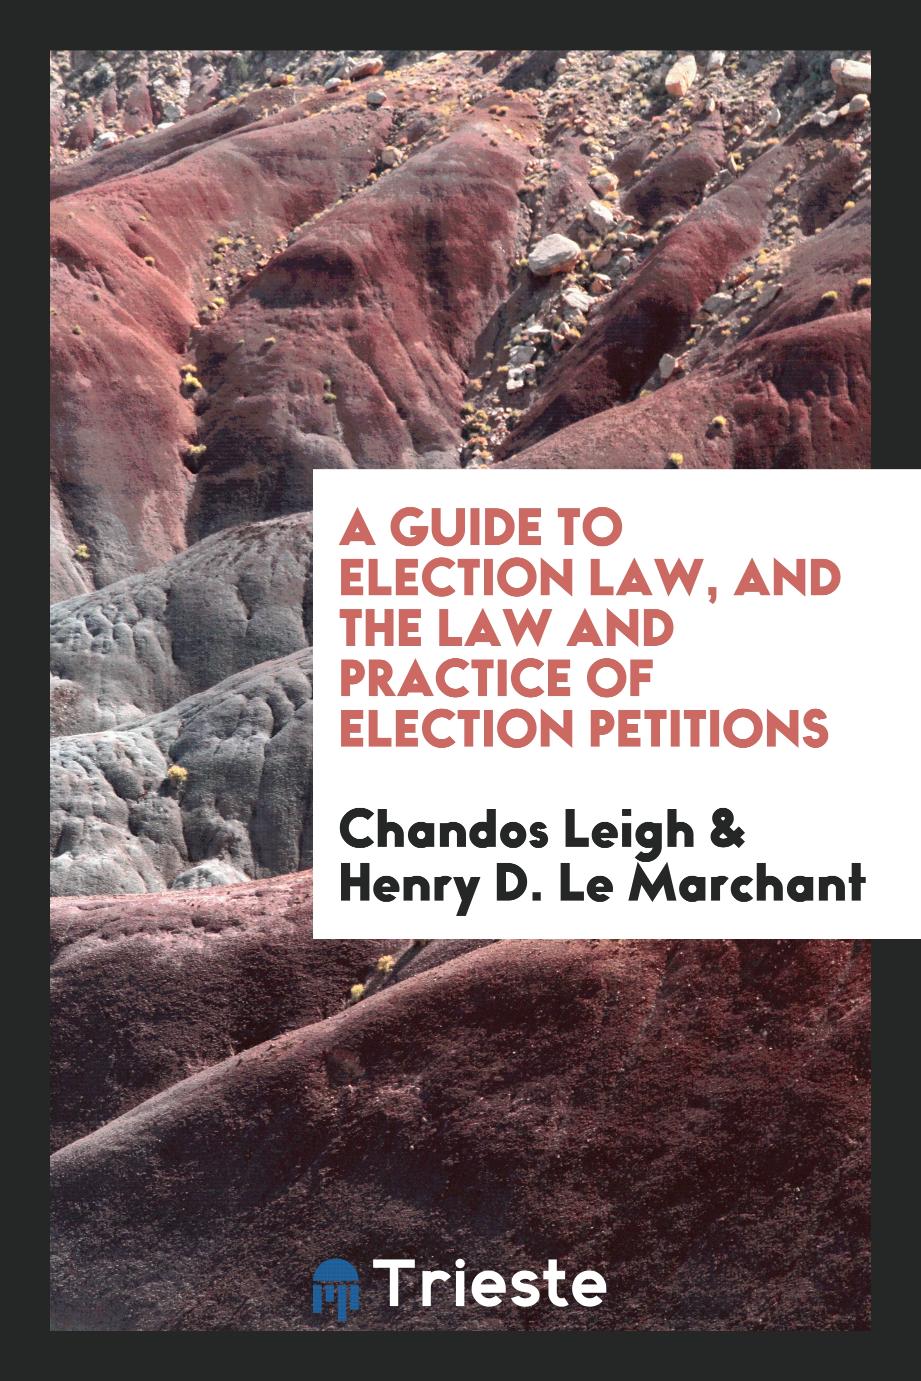 Chandos Leigh, Henry D. Le Marchant - A Guide to Election Law, and the Law and Practice of Election Petitions